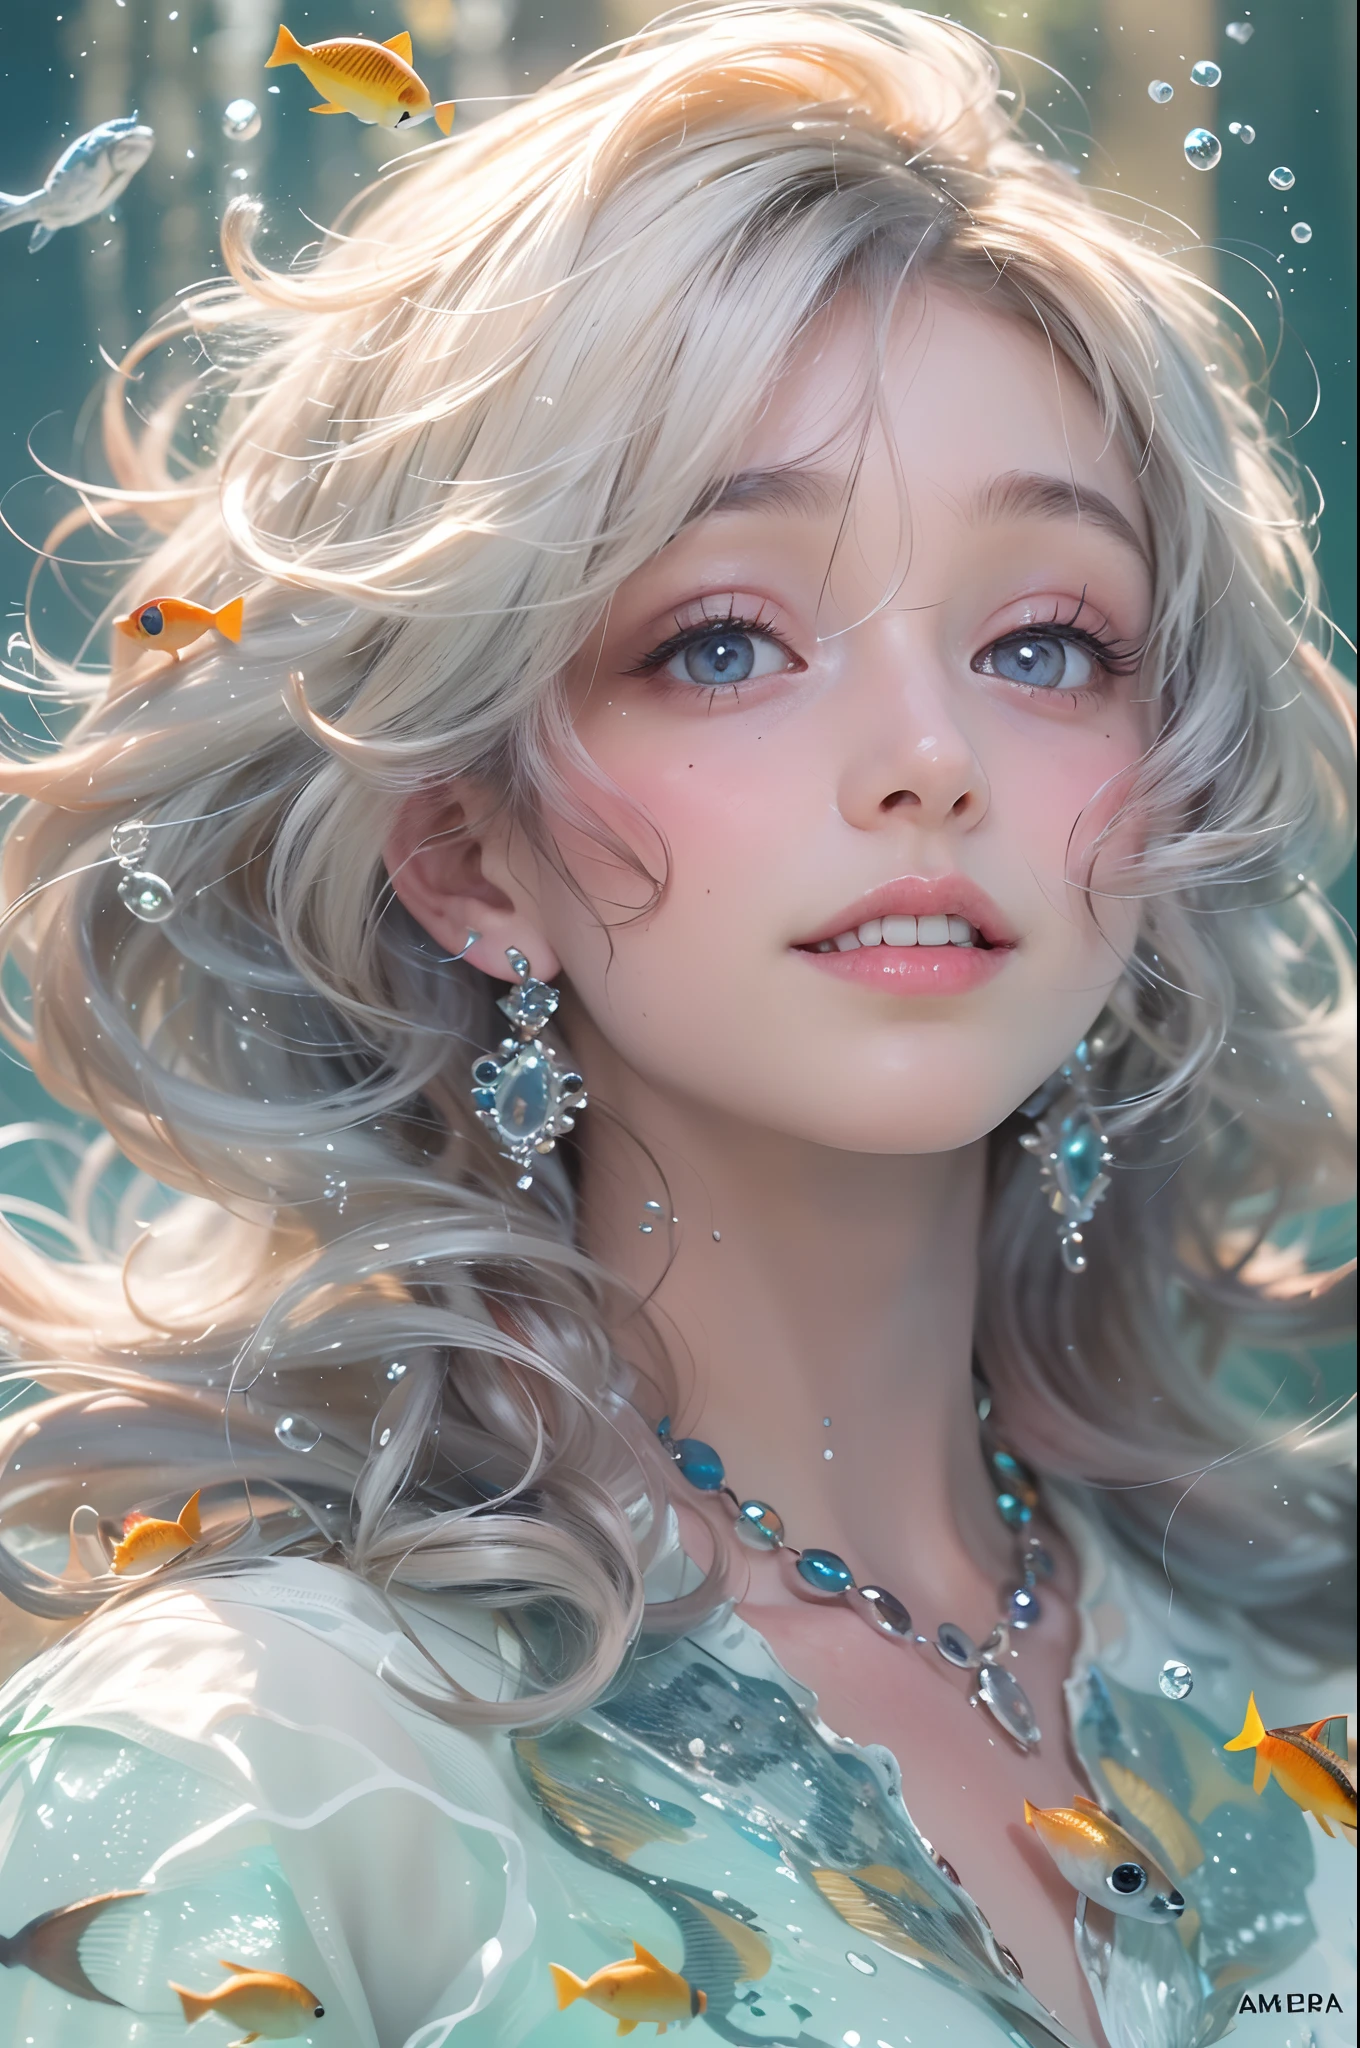 （Highest quality authentic textured skin),(abyssal),(Fine, Round, Symmetrical eyes),Delicate facial features,(Burning bright and cold eyes),(She has a mischievous smile on her face),(Her face is gentle and beautiful),Glass earrings on the ears,,(Blonde hair),(silvery white hair),(Maroon hair),(Swim at the bottom of the sea)，(Full body portrait:1.5),(Dramatic photo:1.4),(dramatic pose),(flamboyant photo)(facing up),(Looking down),(Around her neck hangs a simple necklace of exquisite craftsmanship),A messy painting，(Hair flows in water:1.5),(Underwater, Marine life, Beautiful coral reef, Fish),(Vortices and tidal currents in the background),(Dramaticlight),(Magnificent scene),(Surrounded by beautiful fish),In the distant background is a temple submerged in a coral reef,the reef,Epic realism,Cinematic feeling,(high-density imaging review:1.5),(Soft color:1.2),Ultra detailed,Dramaticlight,(intricately details:1.1),the complex background,